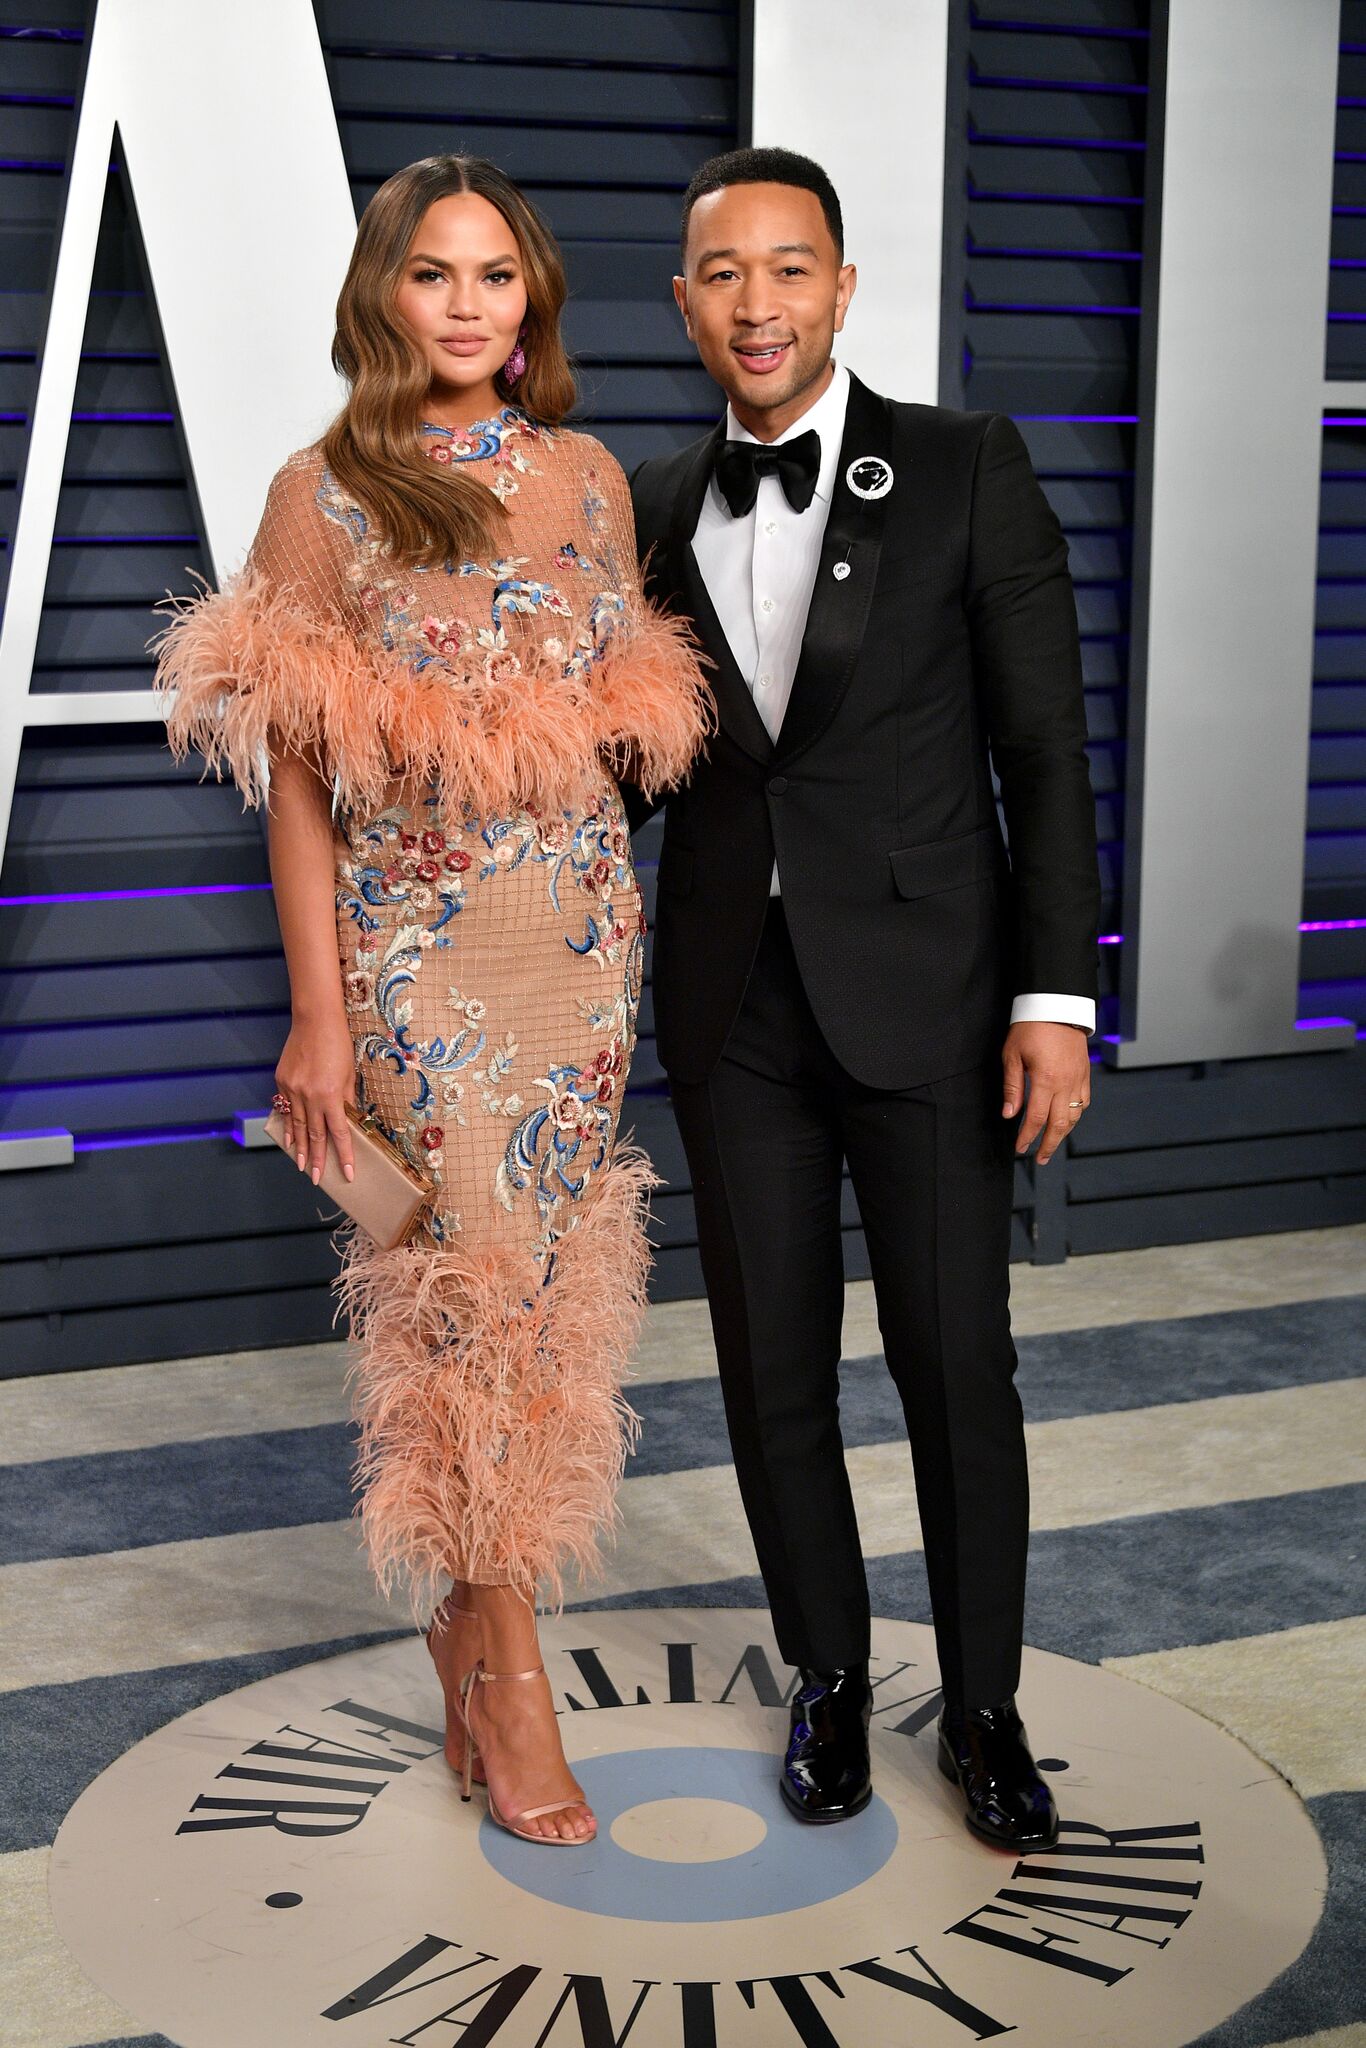 Chrissy Teigen (L) and John Legend attend the 2019 Vanity Fair Oscar Party hosted by Radhika Jones at Wallis Annenberg Center for the Performing Arts on February 24, 2019 | Photo: Getty Images